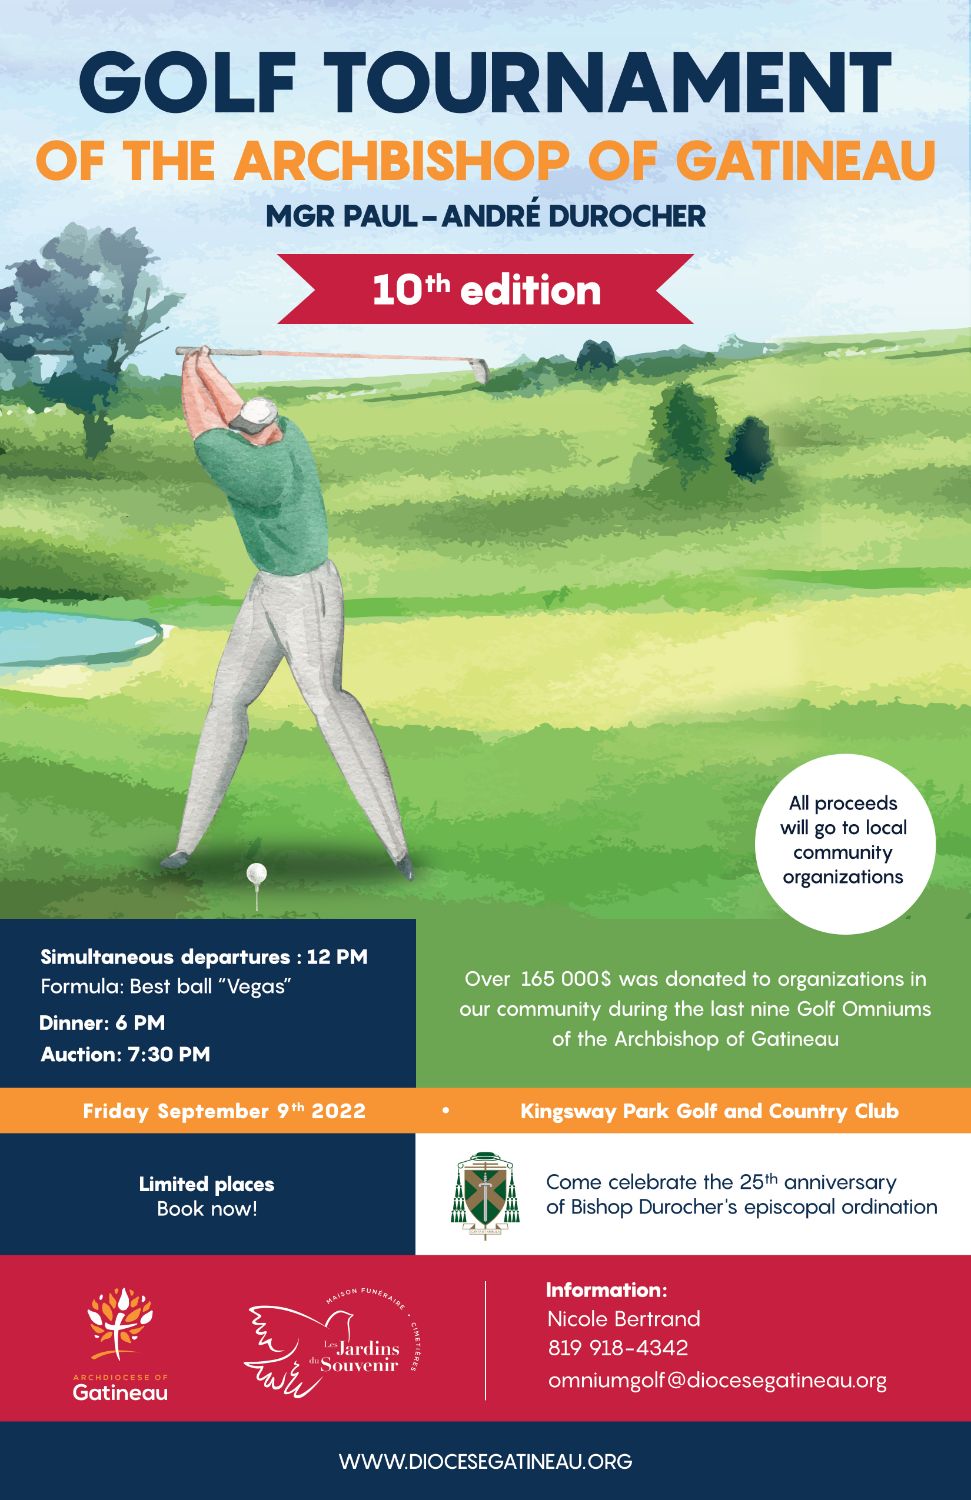 GOLF TOURNAMENT OF THE ARCHBISHOP OF GATINEAU - 10th ÉDITION